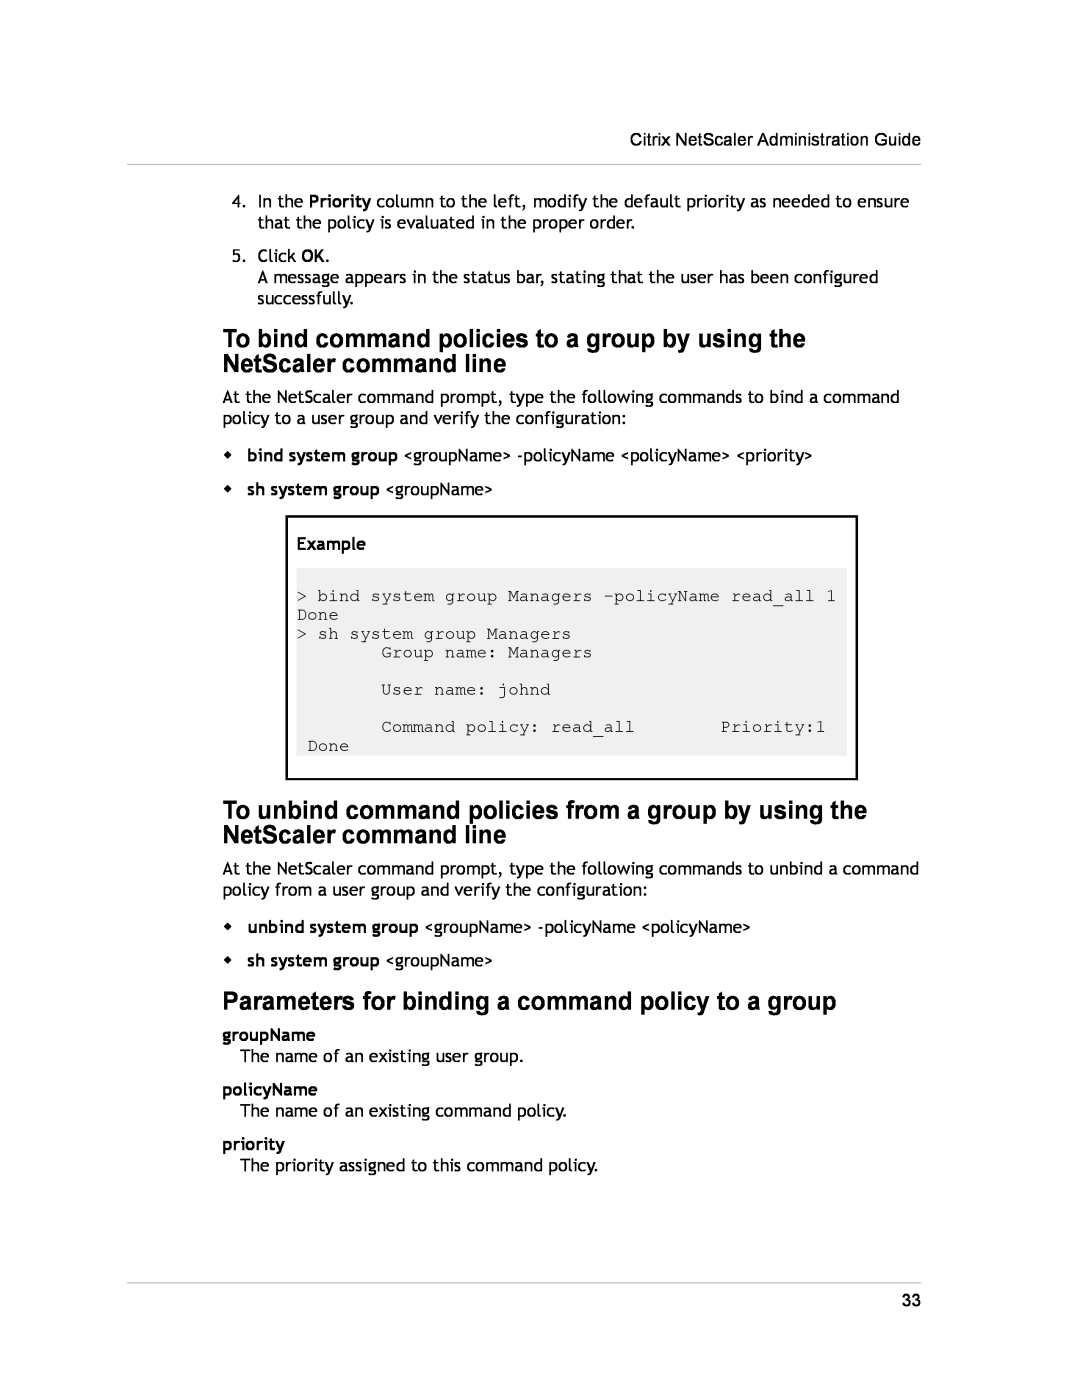 Citrix Systems CITRIX NETSCALER 9.3 manual Parameters for binding a command policy to a group 